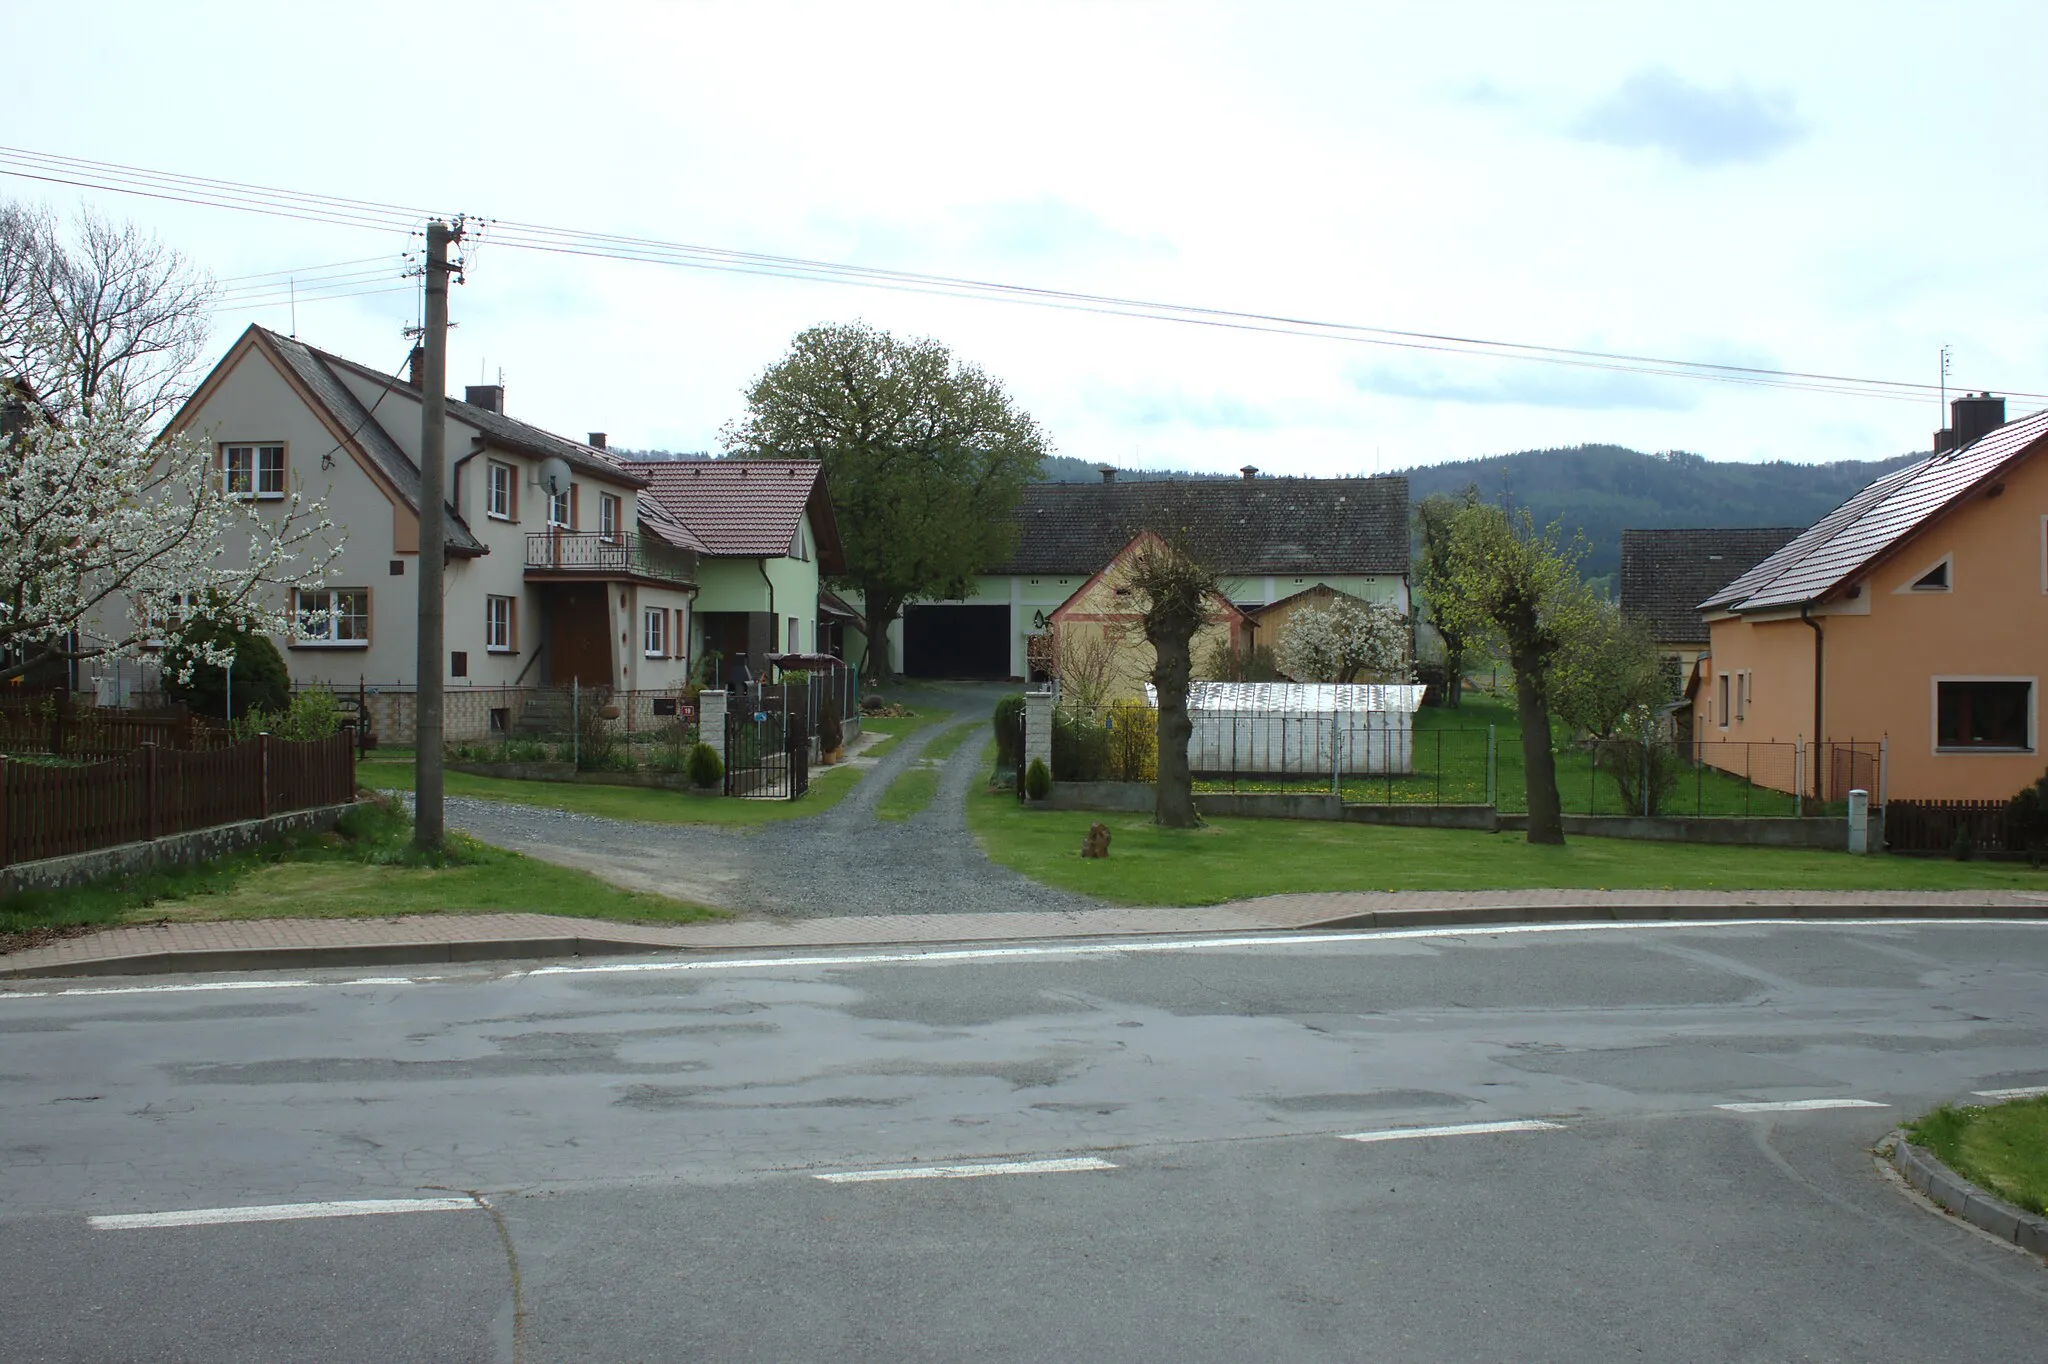 Photo showing: Buildings at the eastern edge of the village of Hradiště, Plzeň Region, CZ